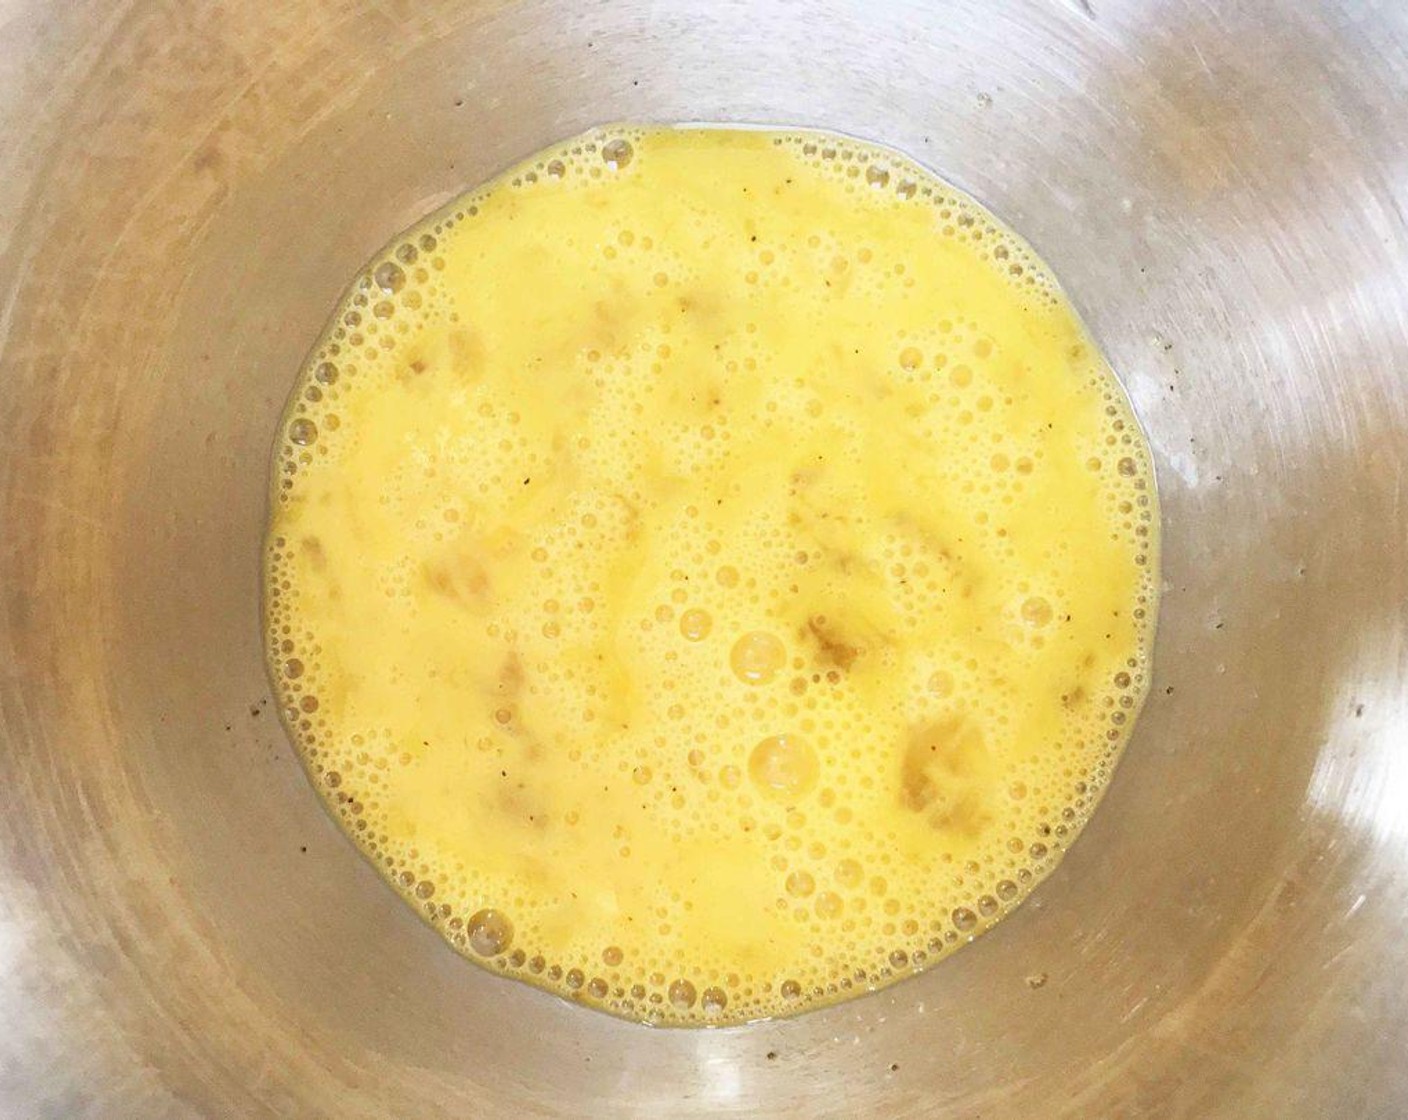 step 2 In a medium bowl, whisk together the Farmhouse Eggs® Large Brown Eggs (2), 2% Reduced Fat Milk (2 Tbsp), Salt (to taste), and Ground Black Pepper (to taste).